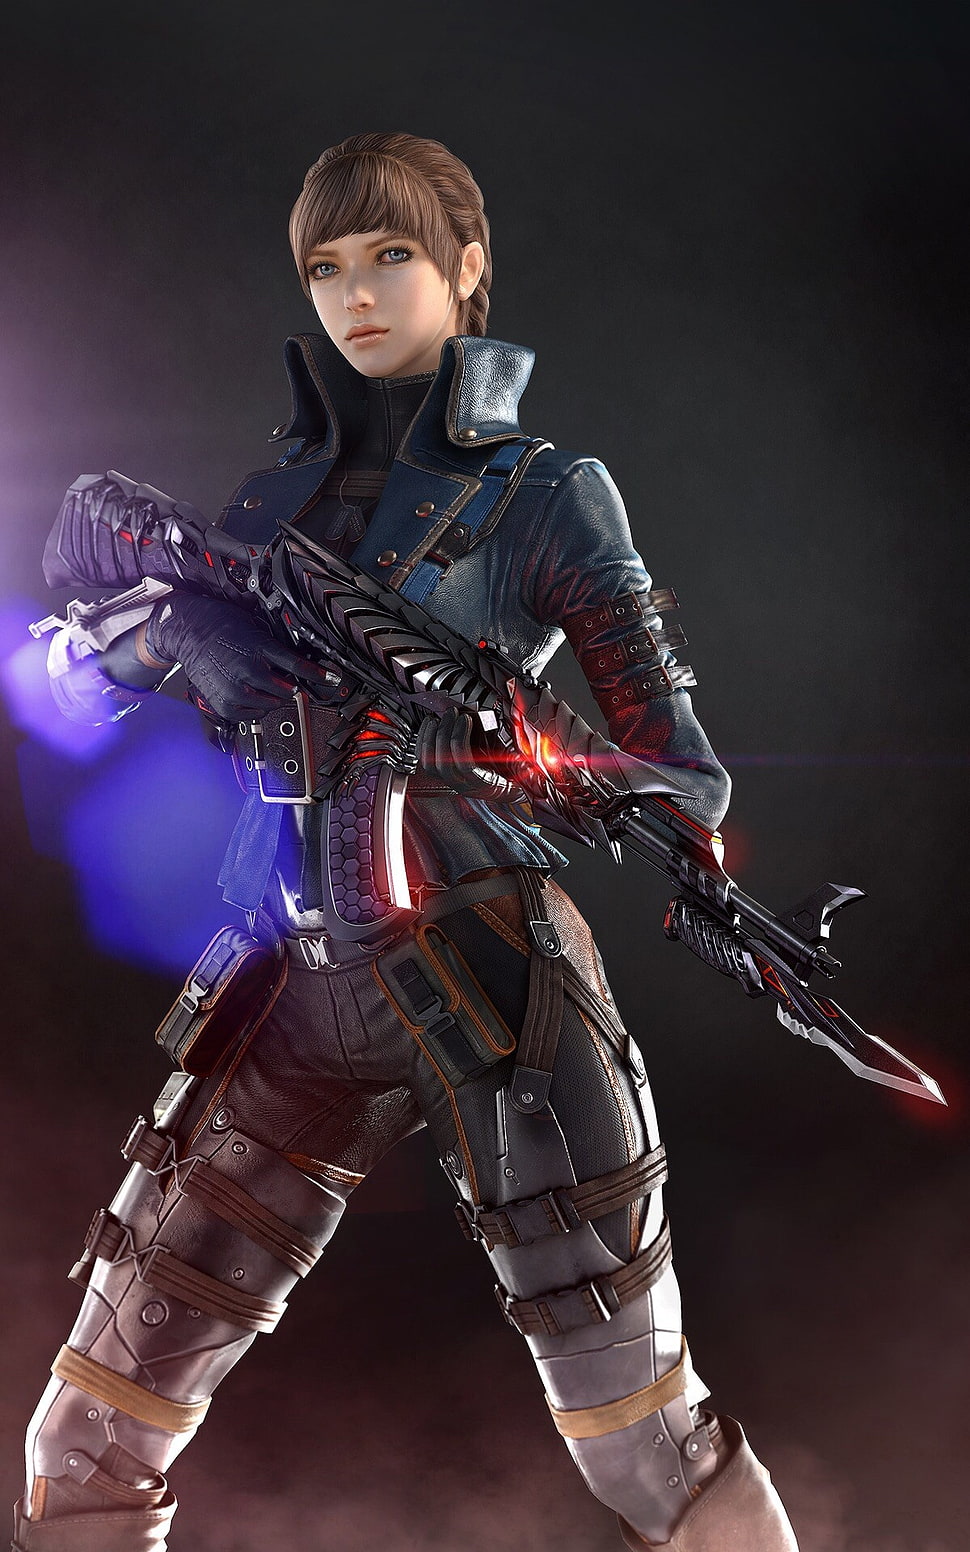 3D female character wearing black armour holding rifle with bayonet illustration HD wallpaper